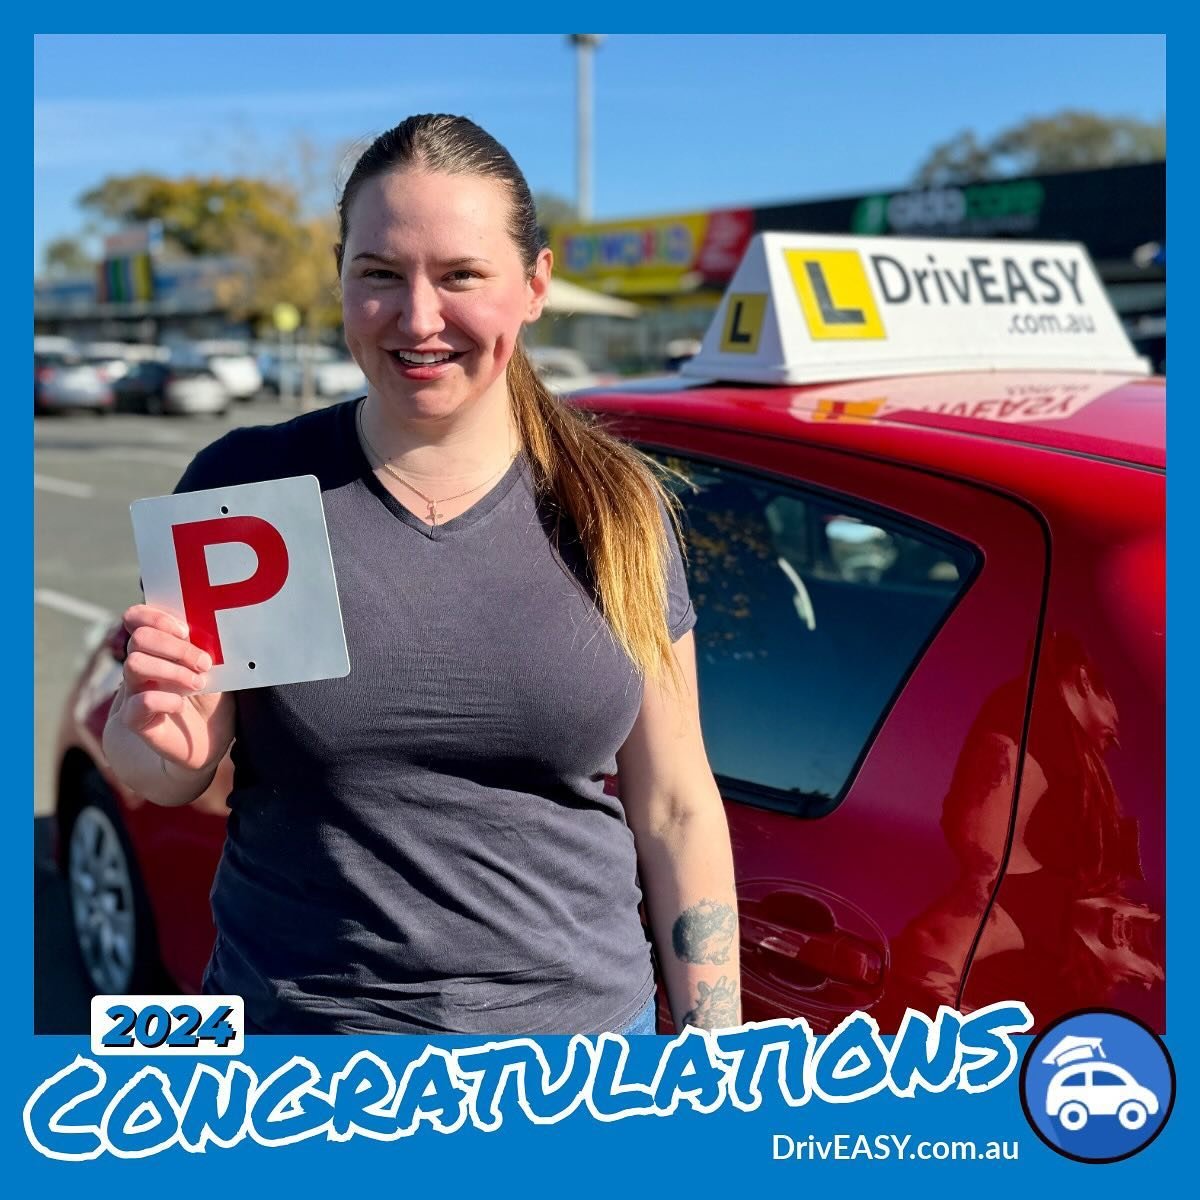 Congratulations Kira, on passing your VORT and becoming a licensed driver! I couldn&rsquo;t be happier for you. Keep up the good work, and stay safe on the roads!